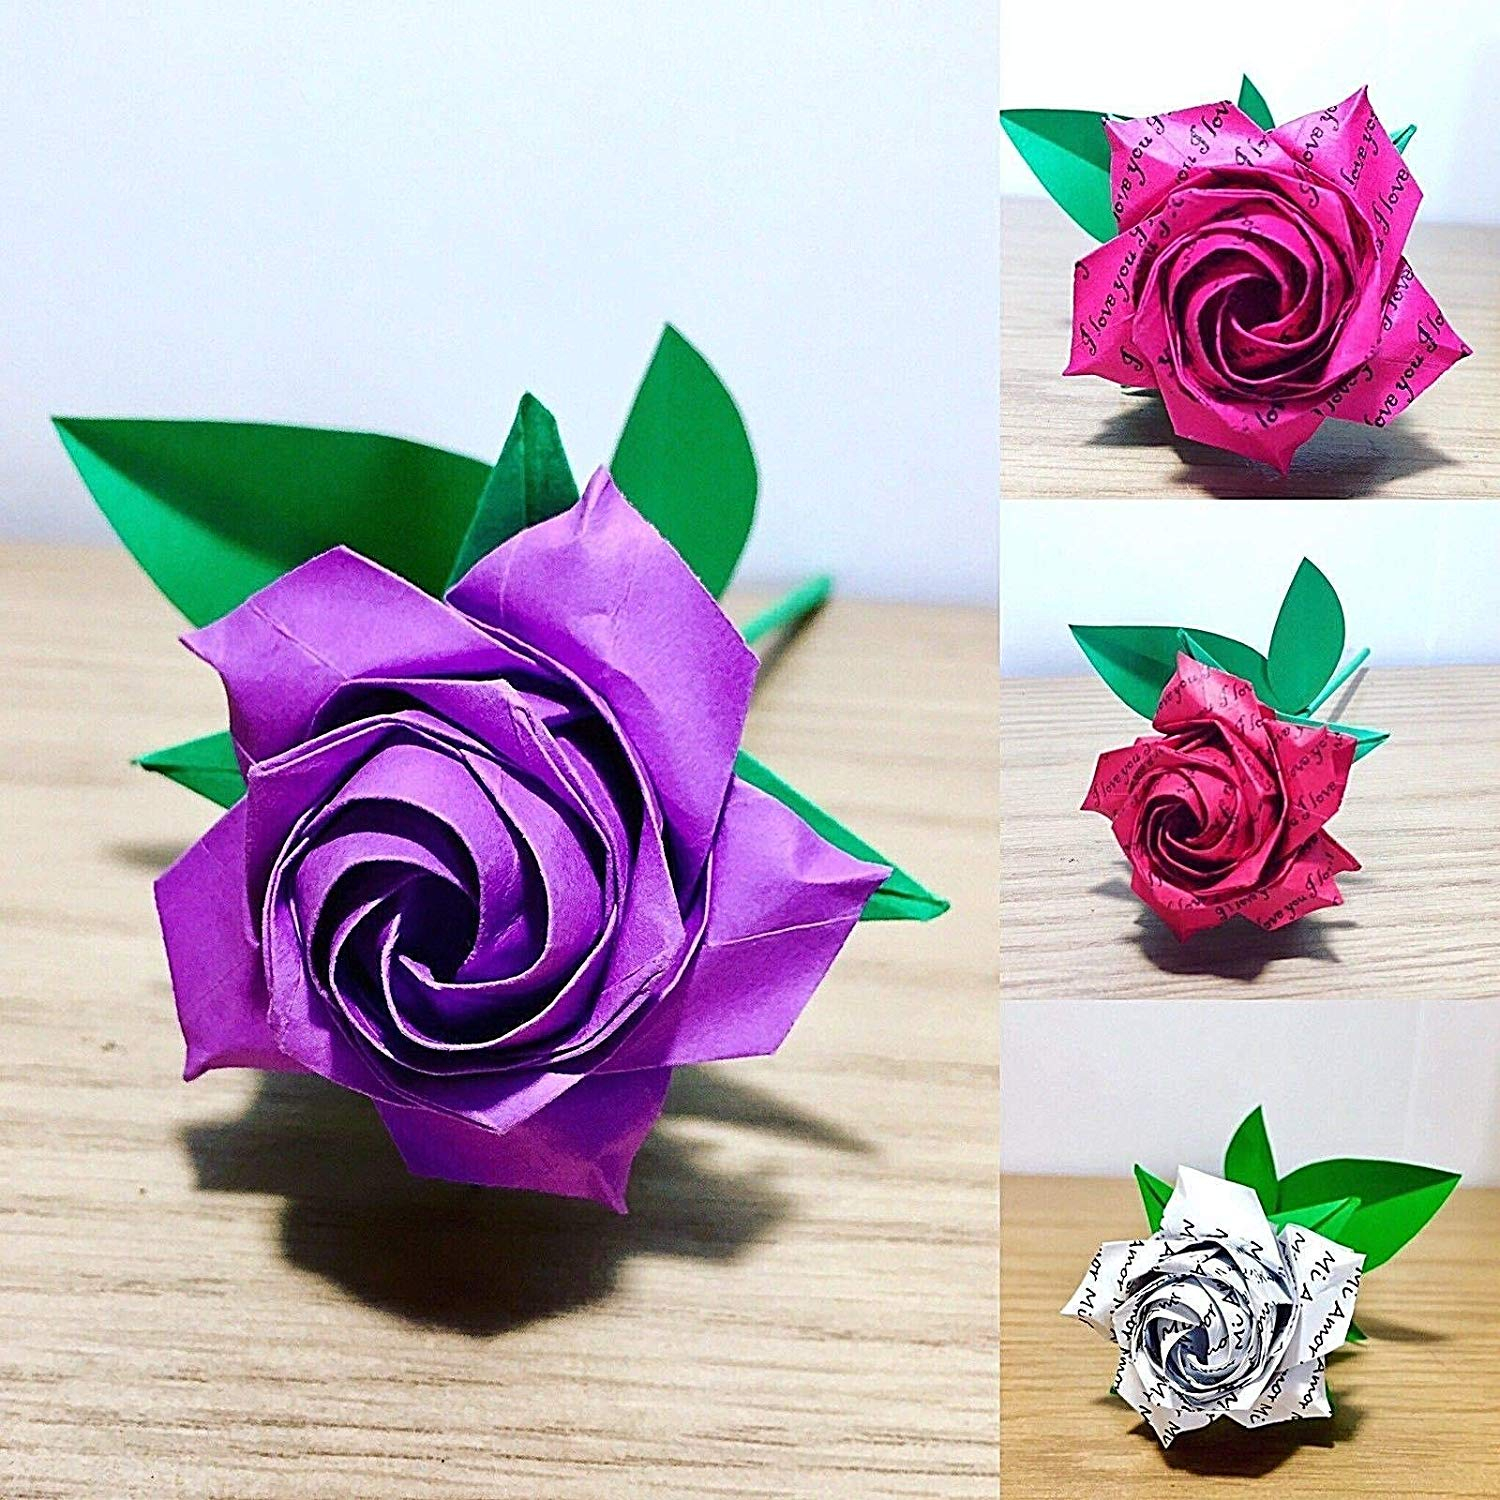 How To Make Flowers With Origami 37 Classy Tutorials Buy Origami Paper Flowers